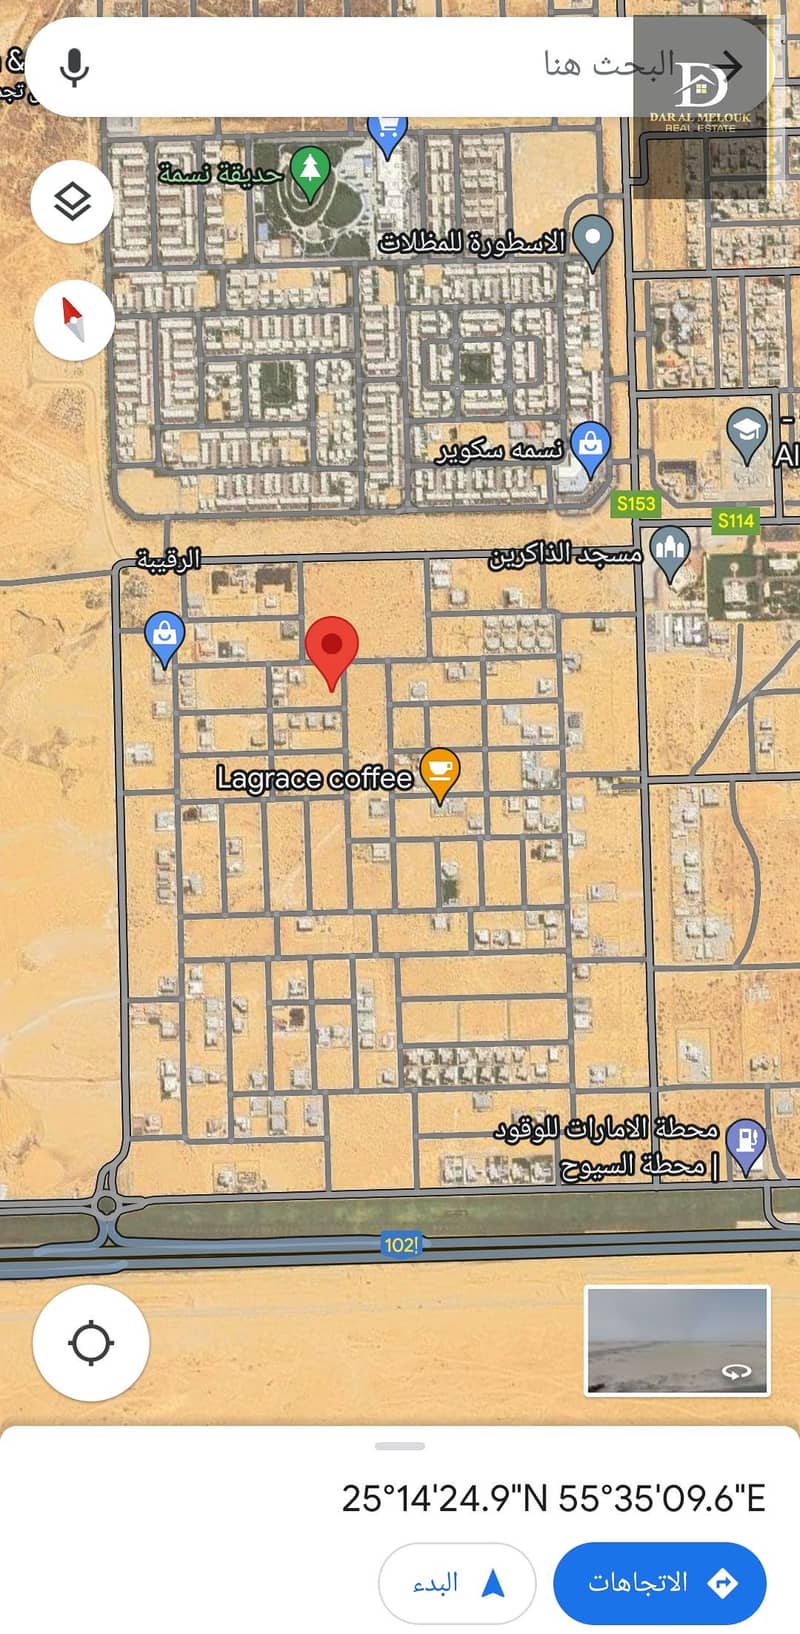 For sale in Sharjah, Al-Raqiba area, Al-Siuh suburb, residential and investment land, area of ​​11,280 feet, permit for a ground villa and the first corner on two streets, excellent location, close to services, close to the mosque. The Al-Raqiba area is d